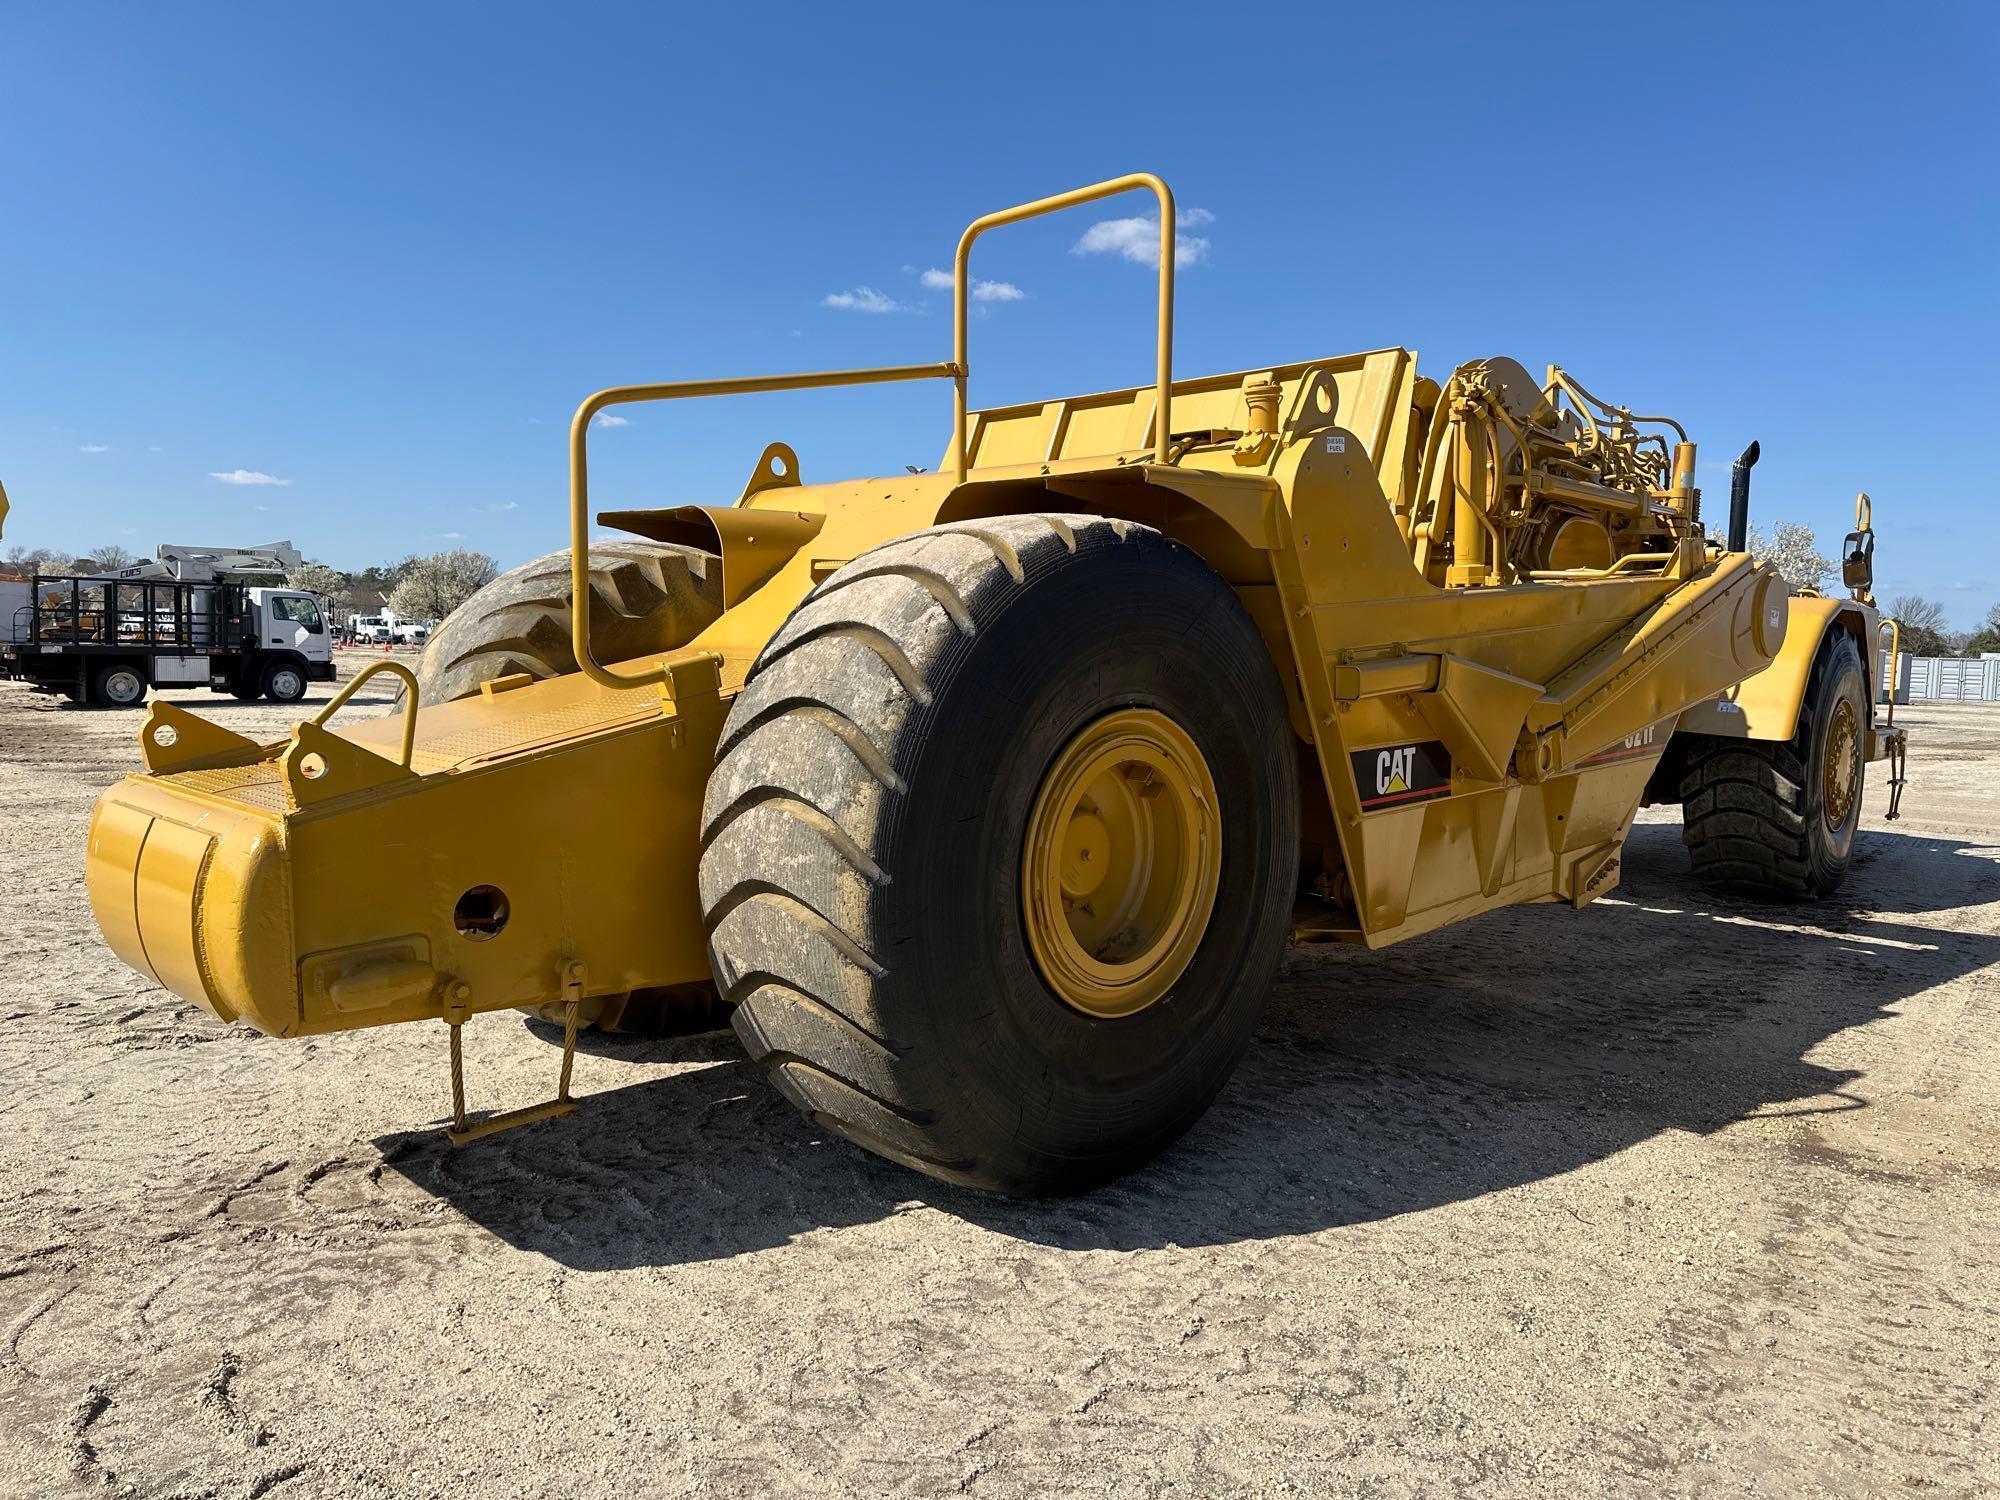 CAT 621F MOTOR SCRAPER SN:4SK00981 powered by Cat 3406CTA diesel engine, 330hp, equipped with